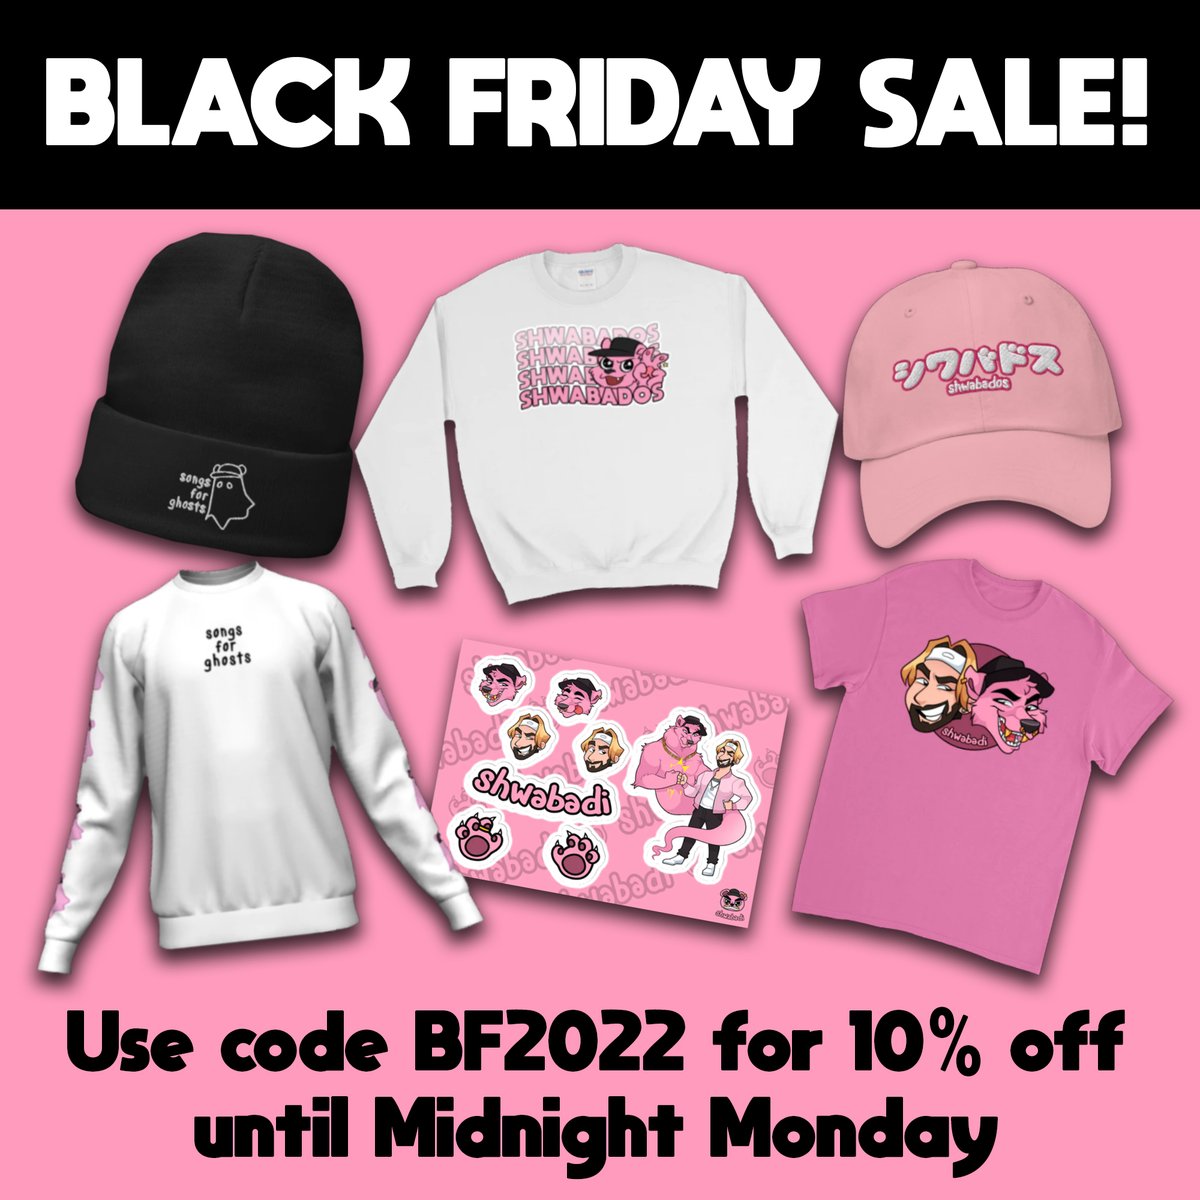 Happy Thanksgiving to those that celebrate it, and a very happy Black Friday sale!! 10% of everything when you use code BF2022 until midnight on Monday!

fanfiber.com/shwabadi